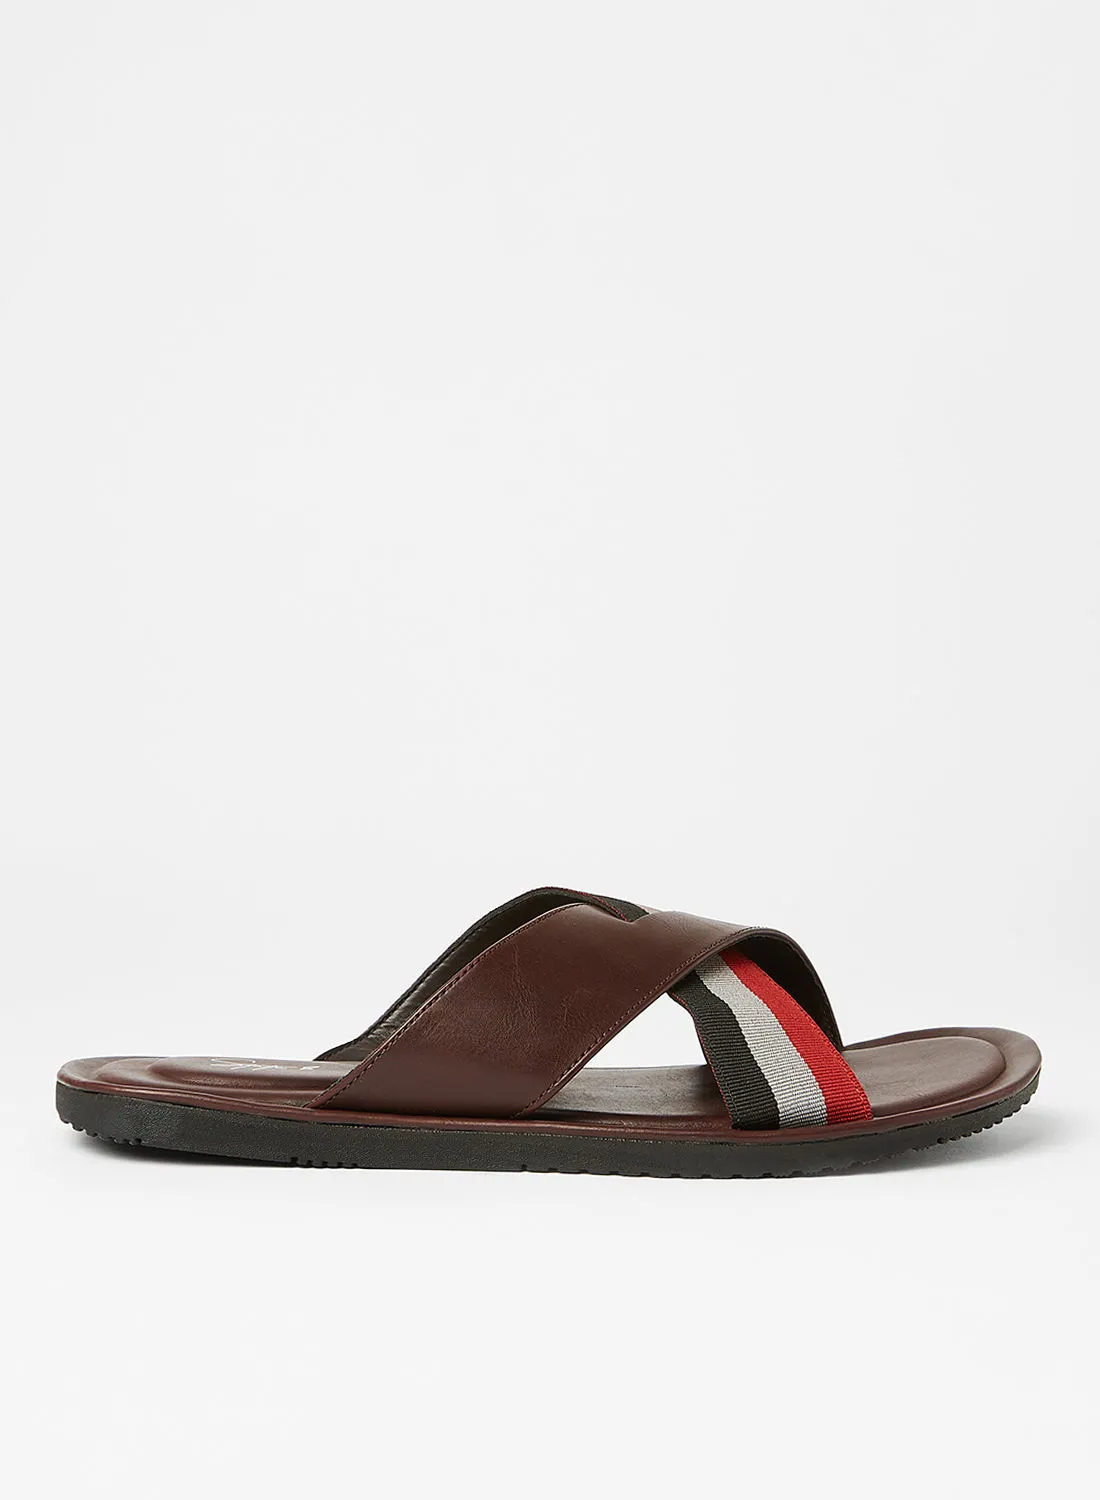 STATE 8 Striped Cross Strap Sandals Brown